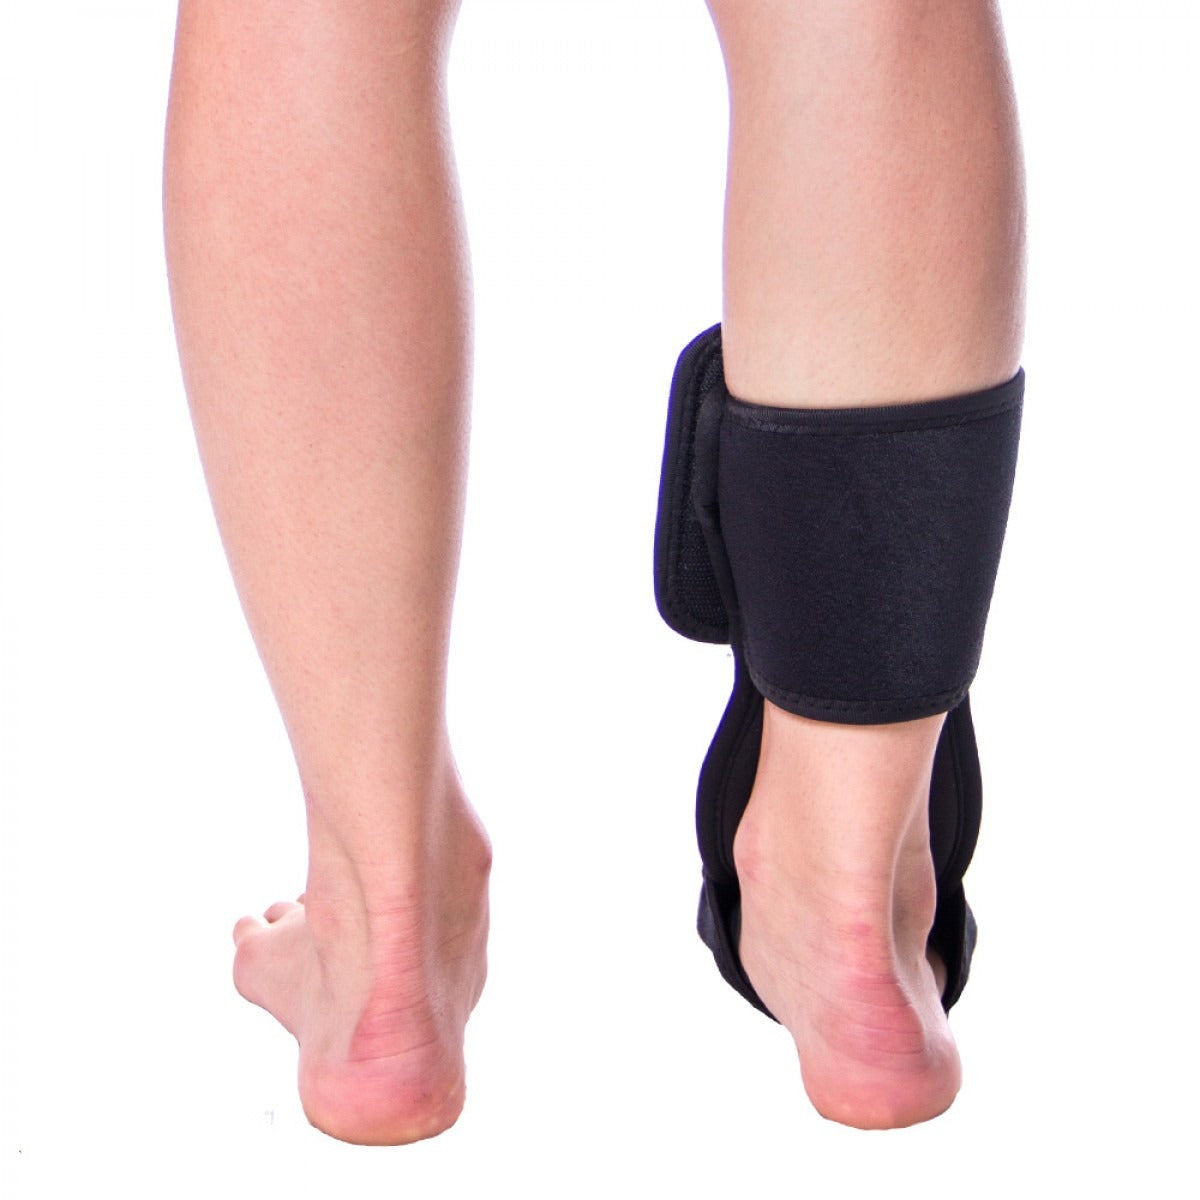 Soft night splint secures and stabilizes your foot and ankle, leaving your heel open